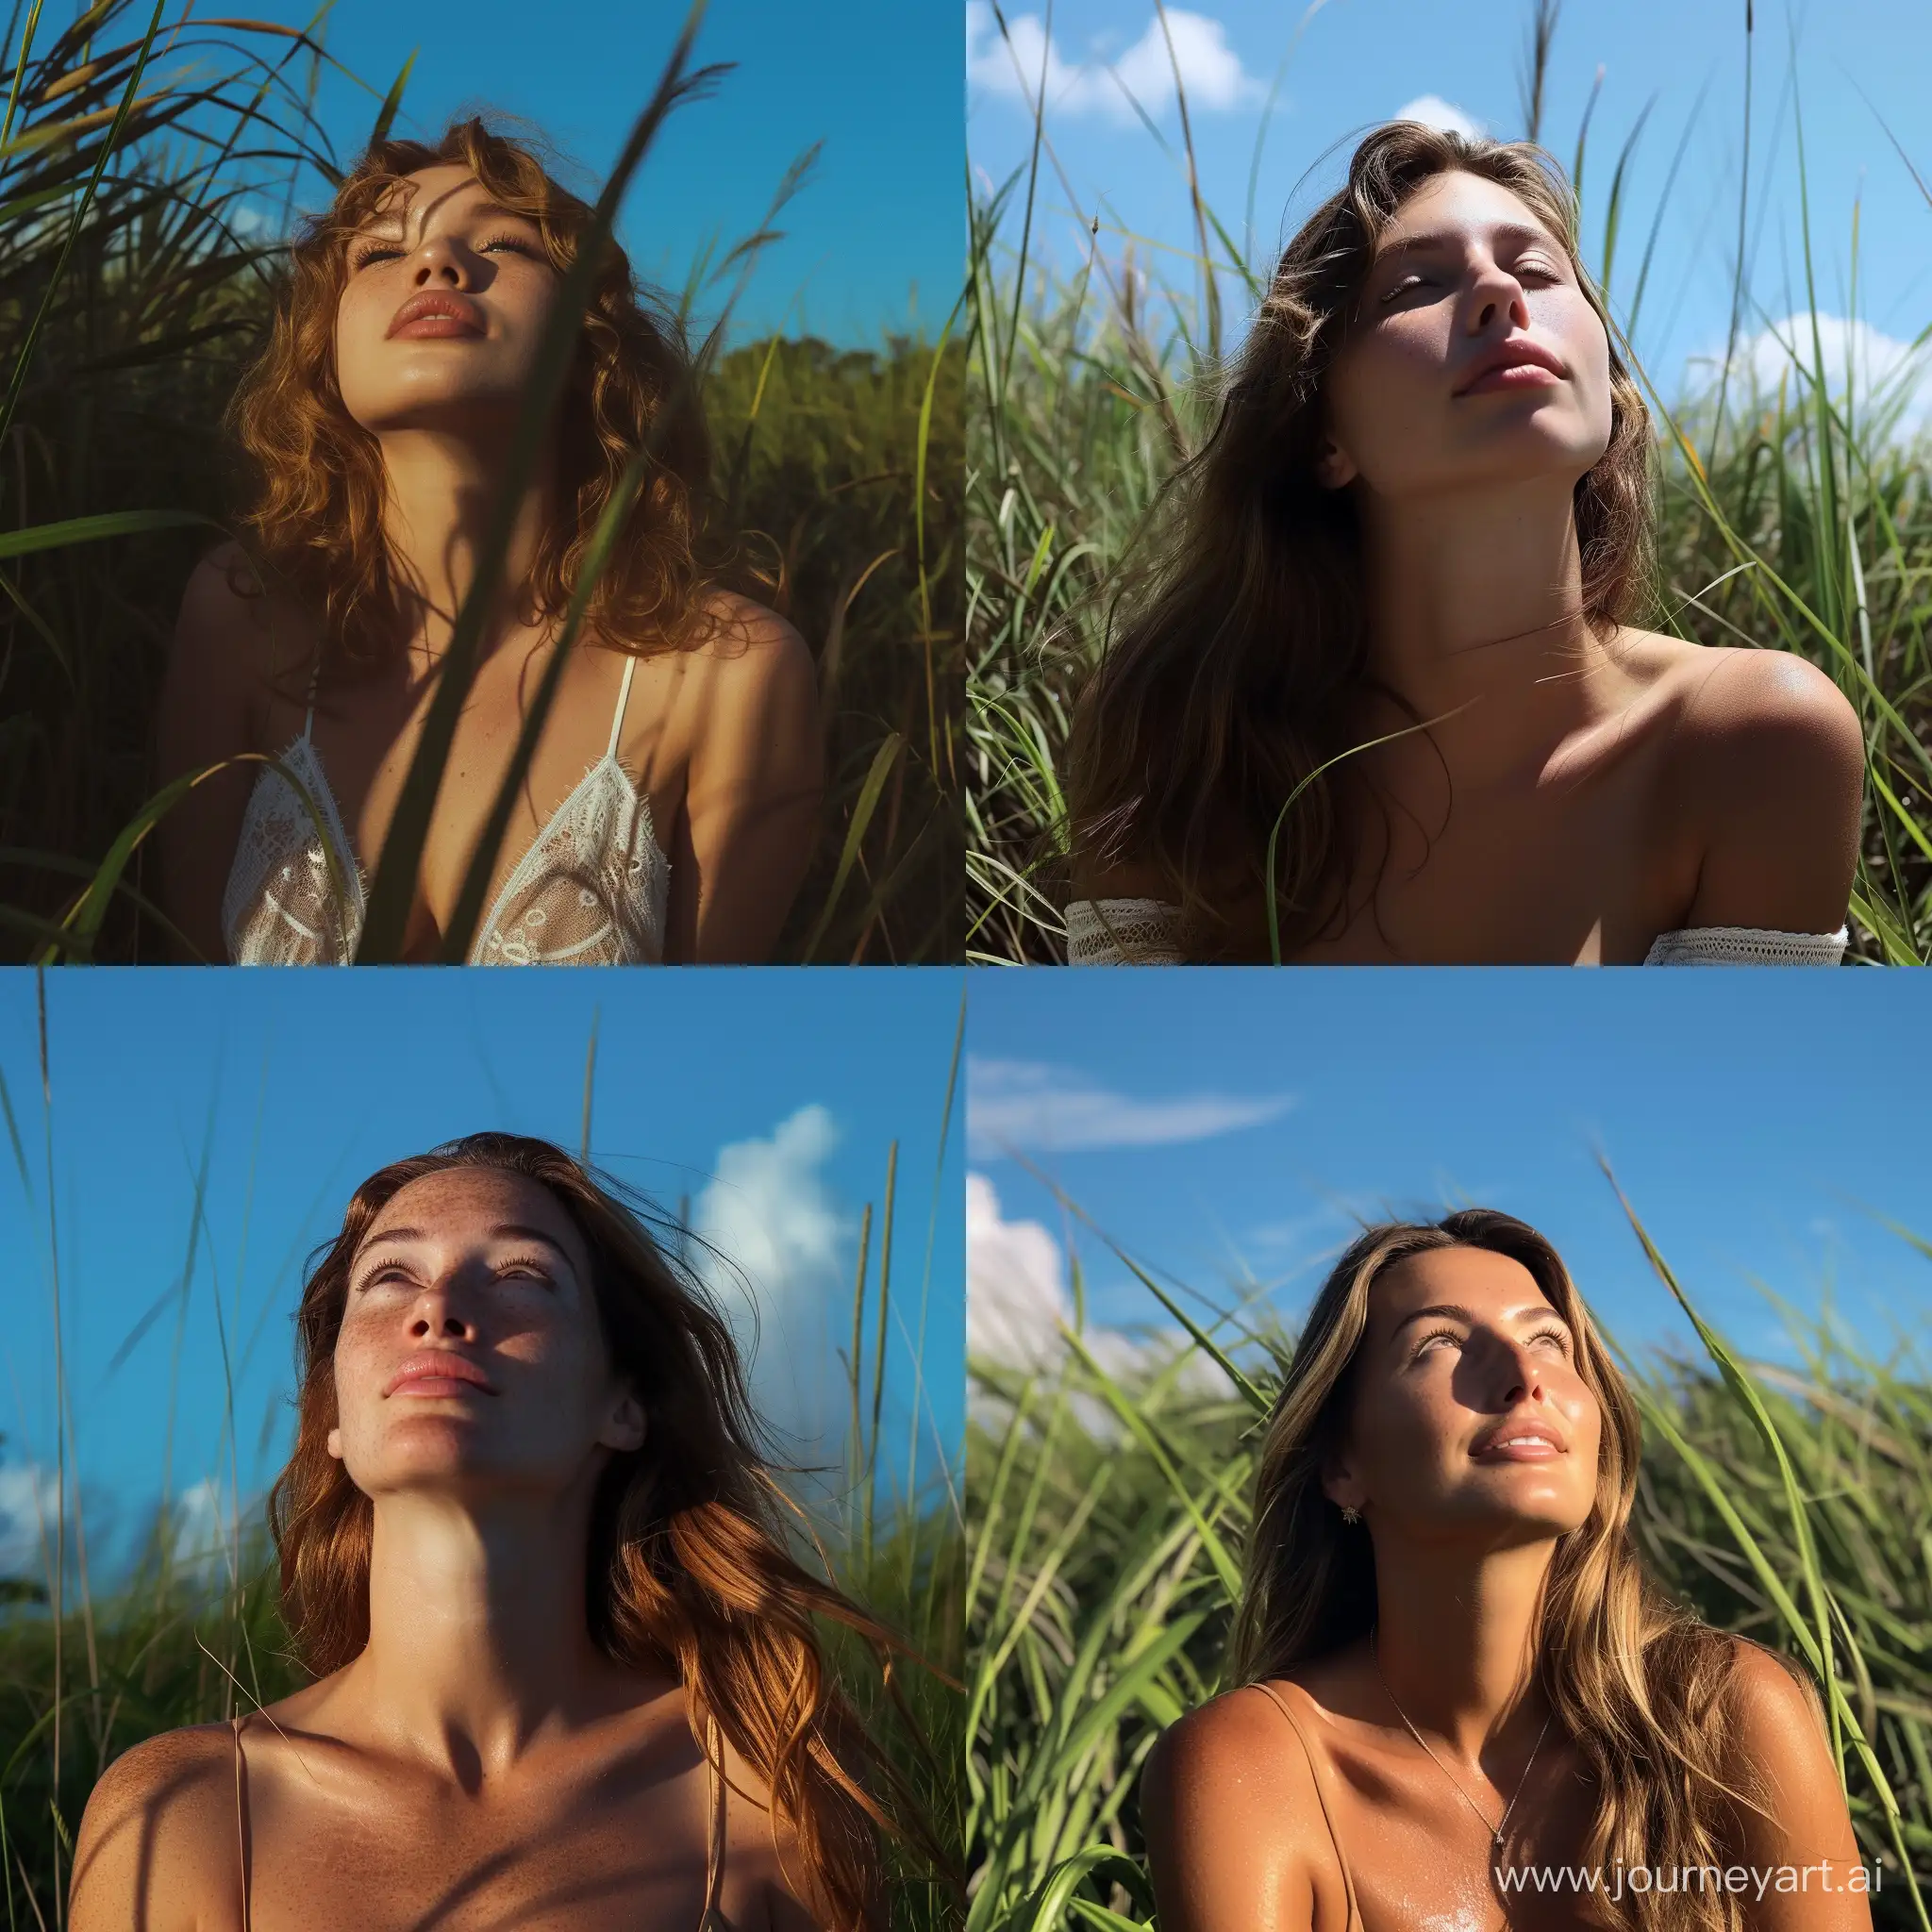 ((hour glass physique)), light brown hair model that dose not exist in real life, dappled light, looking up towards the blue sky, in tropical grassland, visible clevage